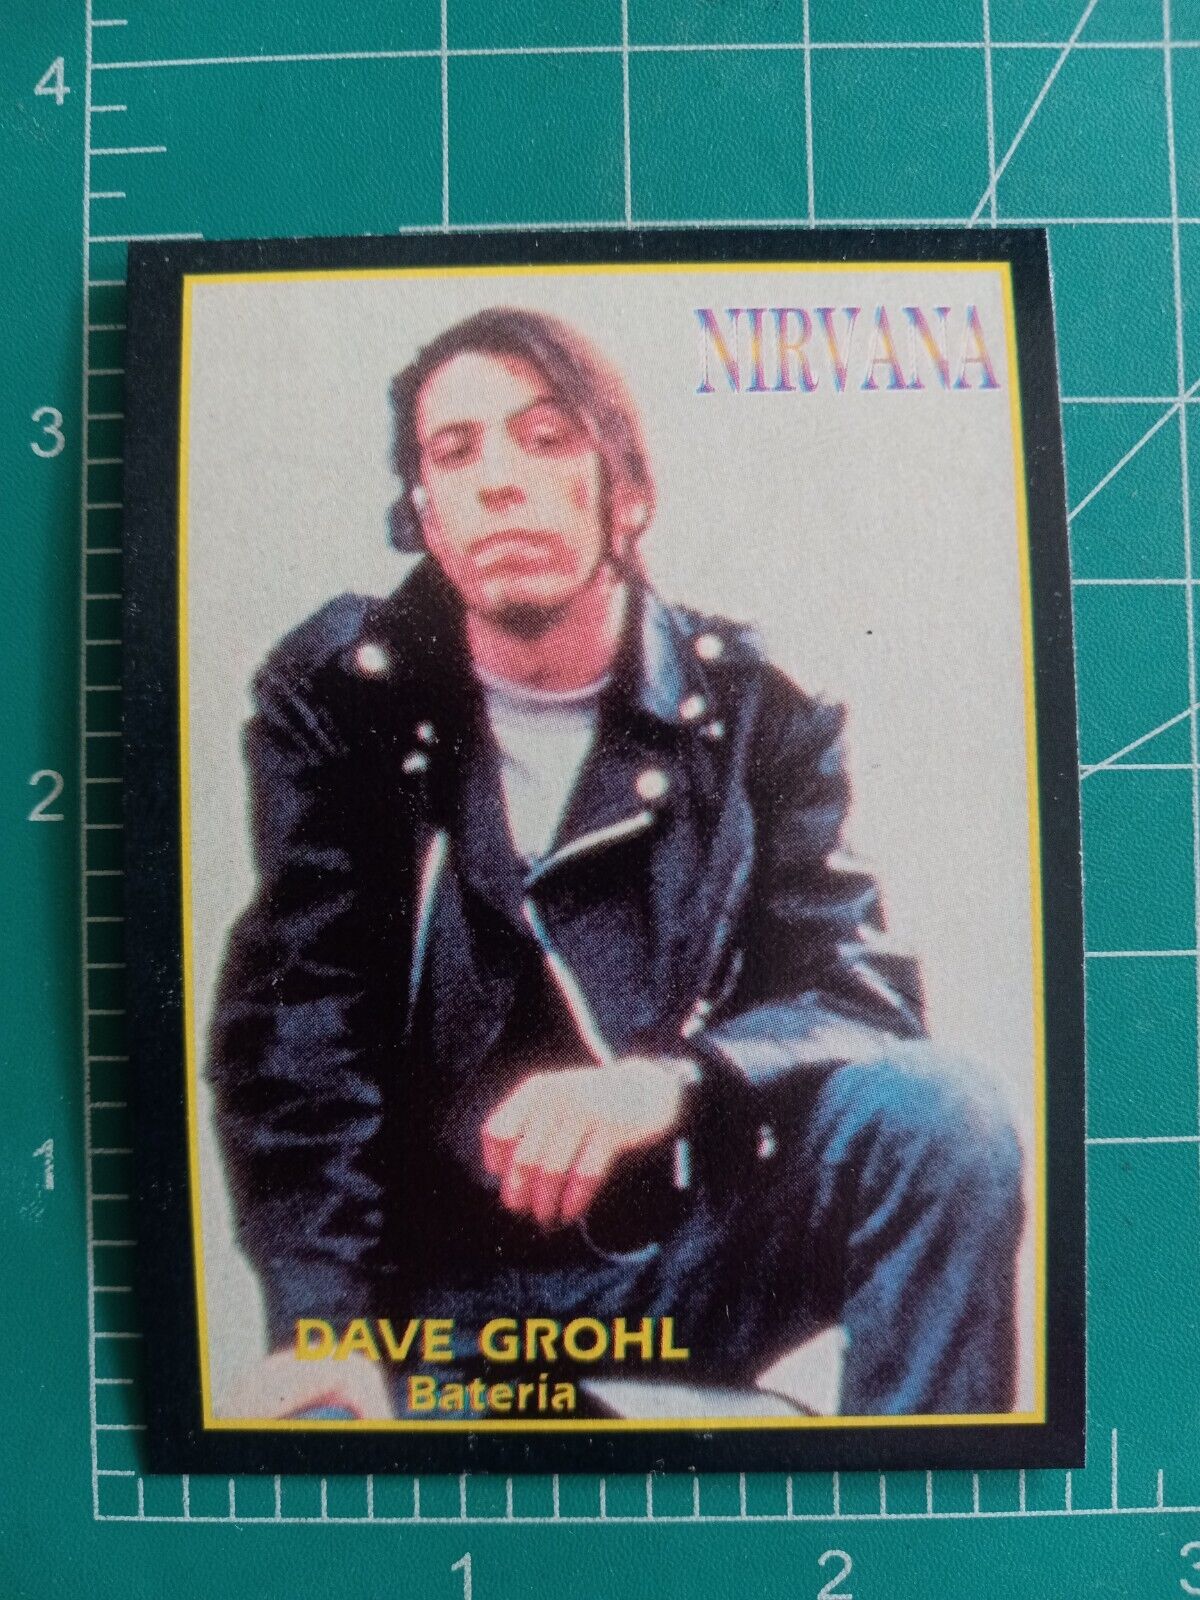 1994 Argentina Rock ULTRA FIGUS NIRVANA CARD DAVE GROHL 